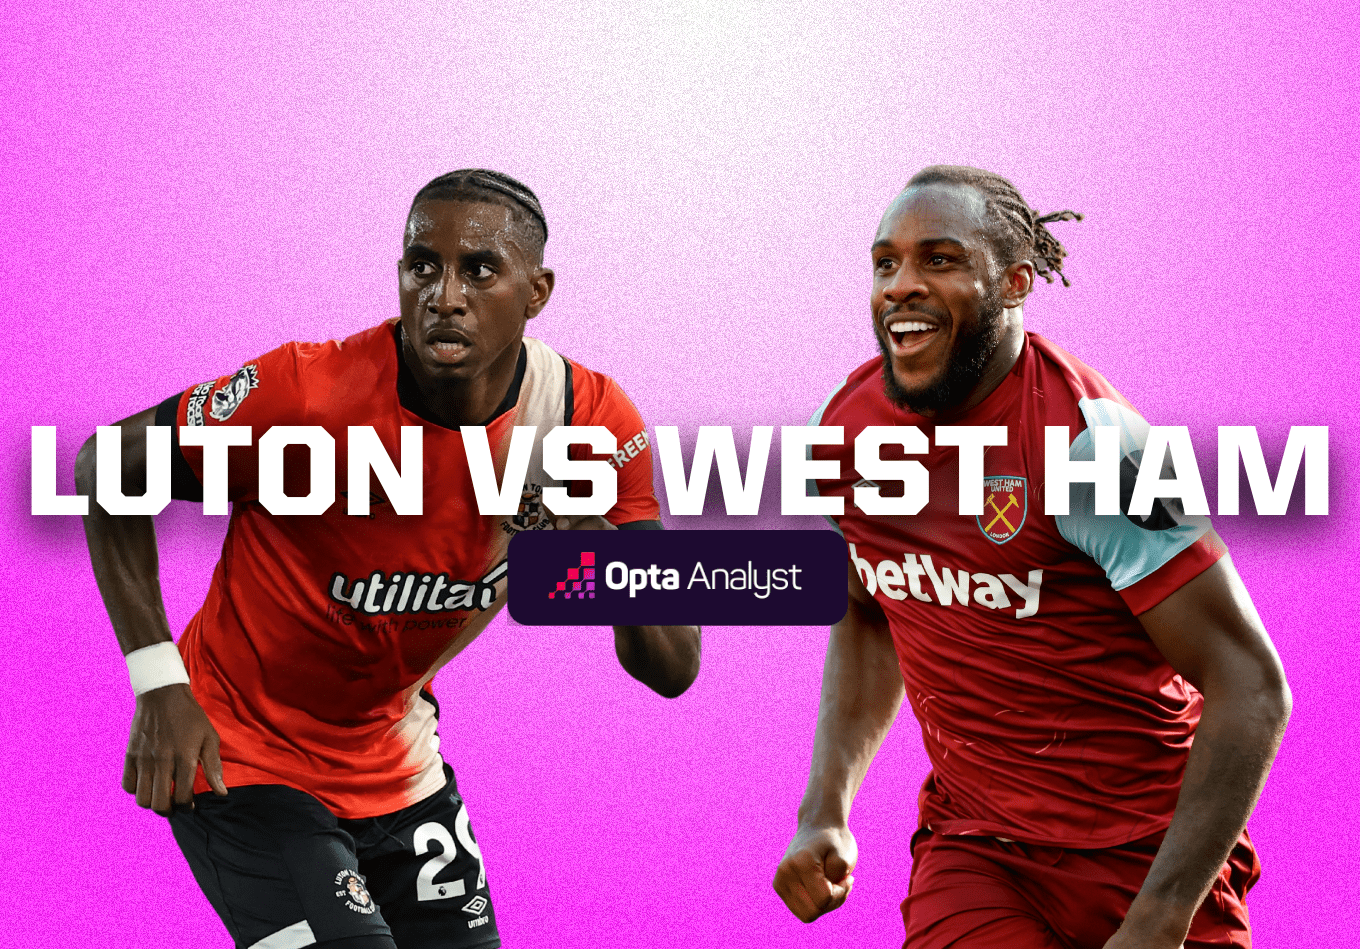 Luton Town vs West Ham United: Prediction and Preview | The Analyst